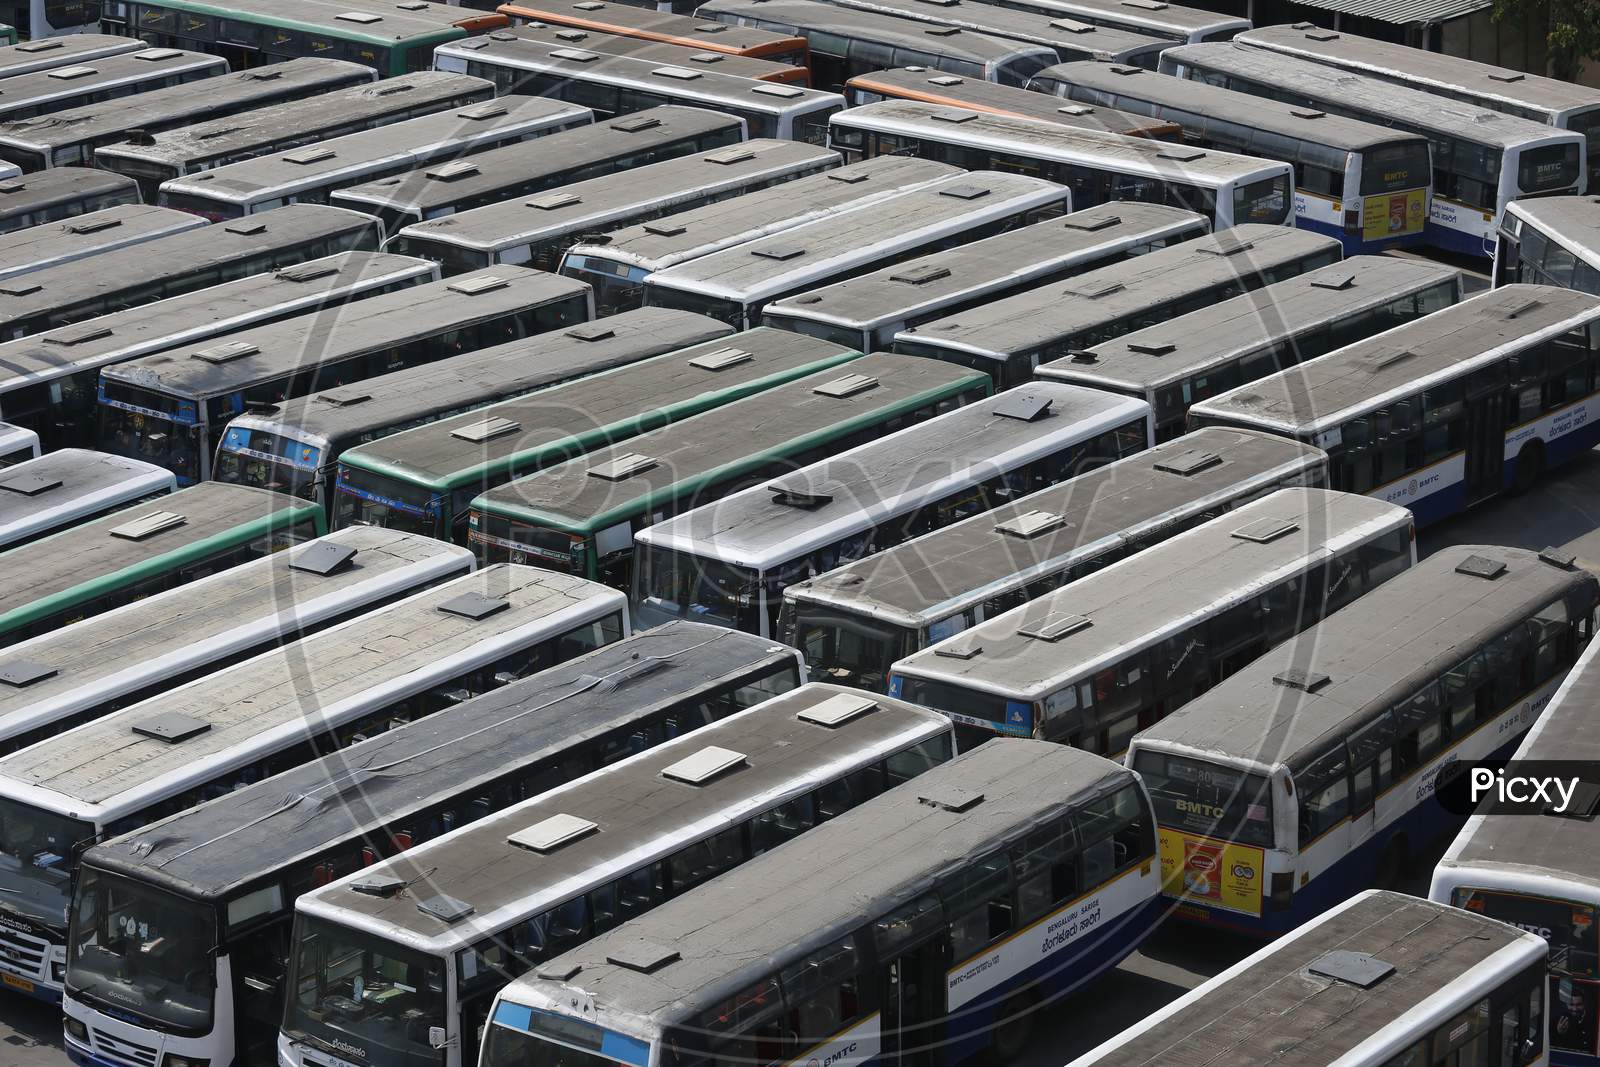 Stranded BMTC Buses In a Kempe Gowda bus terminal In bangalore City During Lock Down For Corona Virus of COVID-19 Pandemic Situations. bangalore